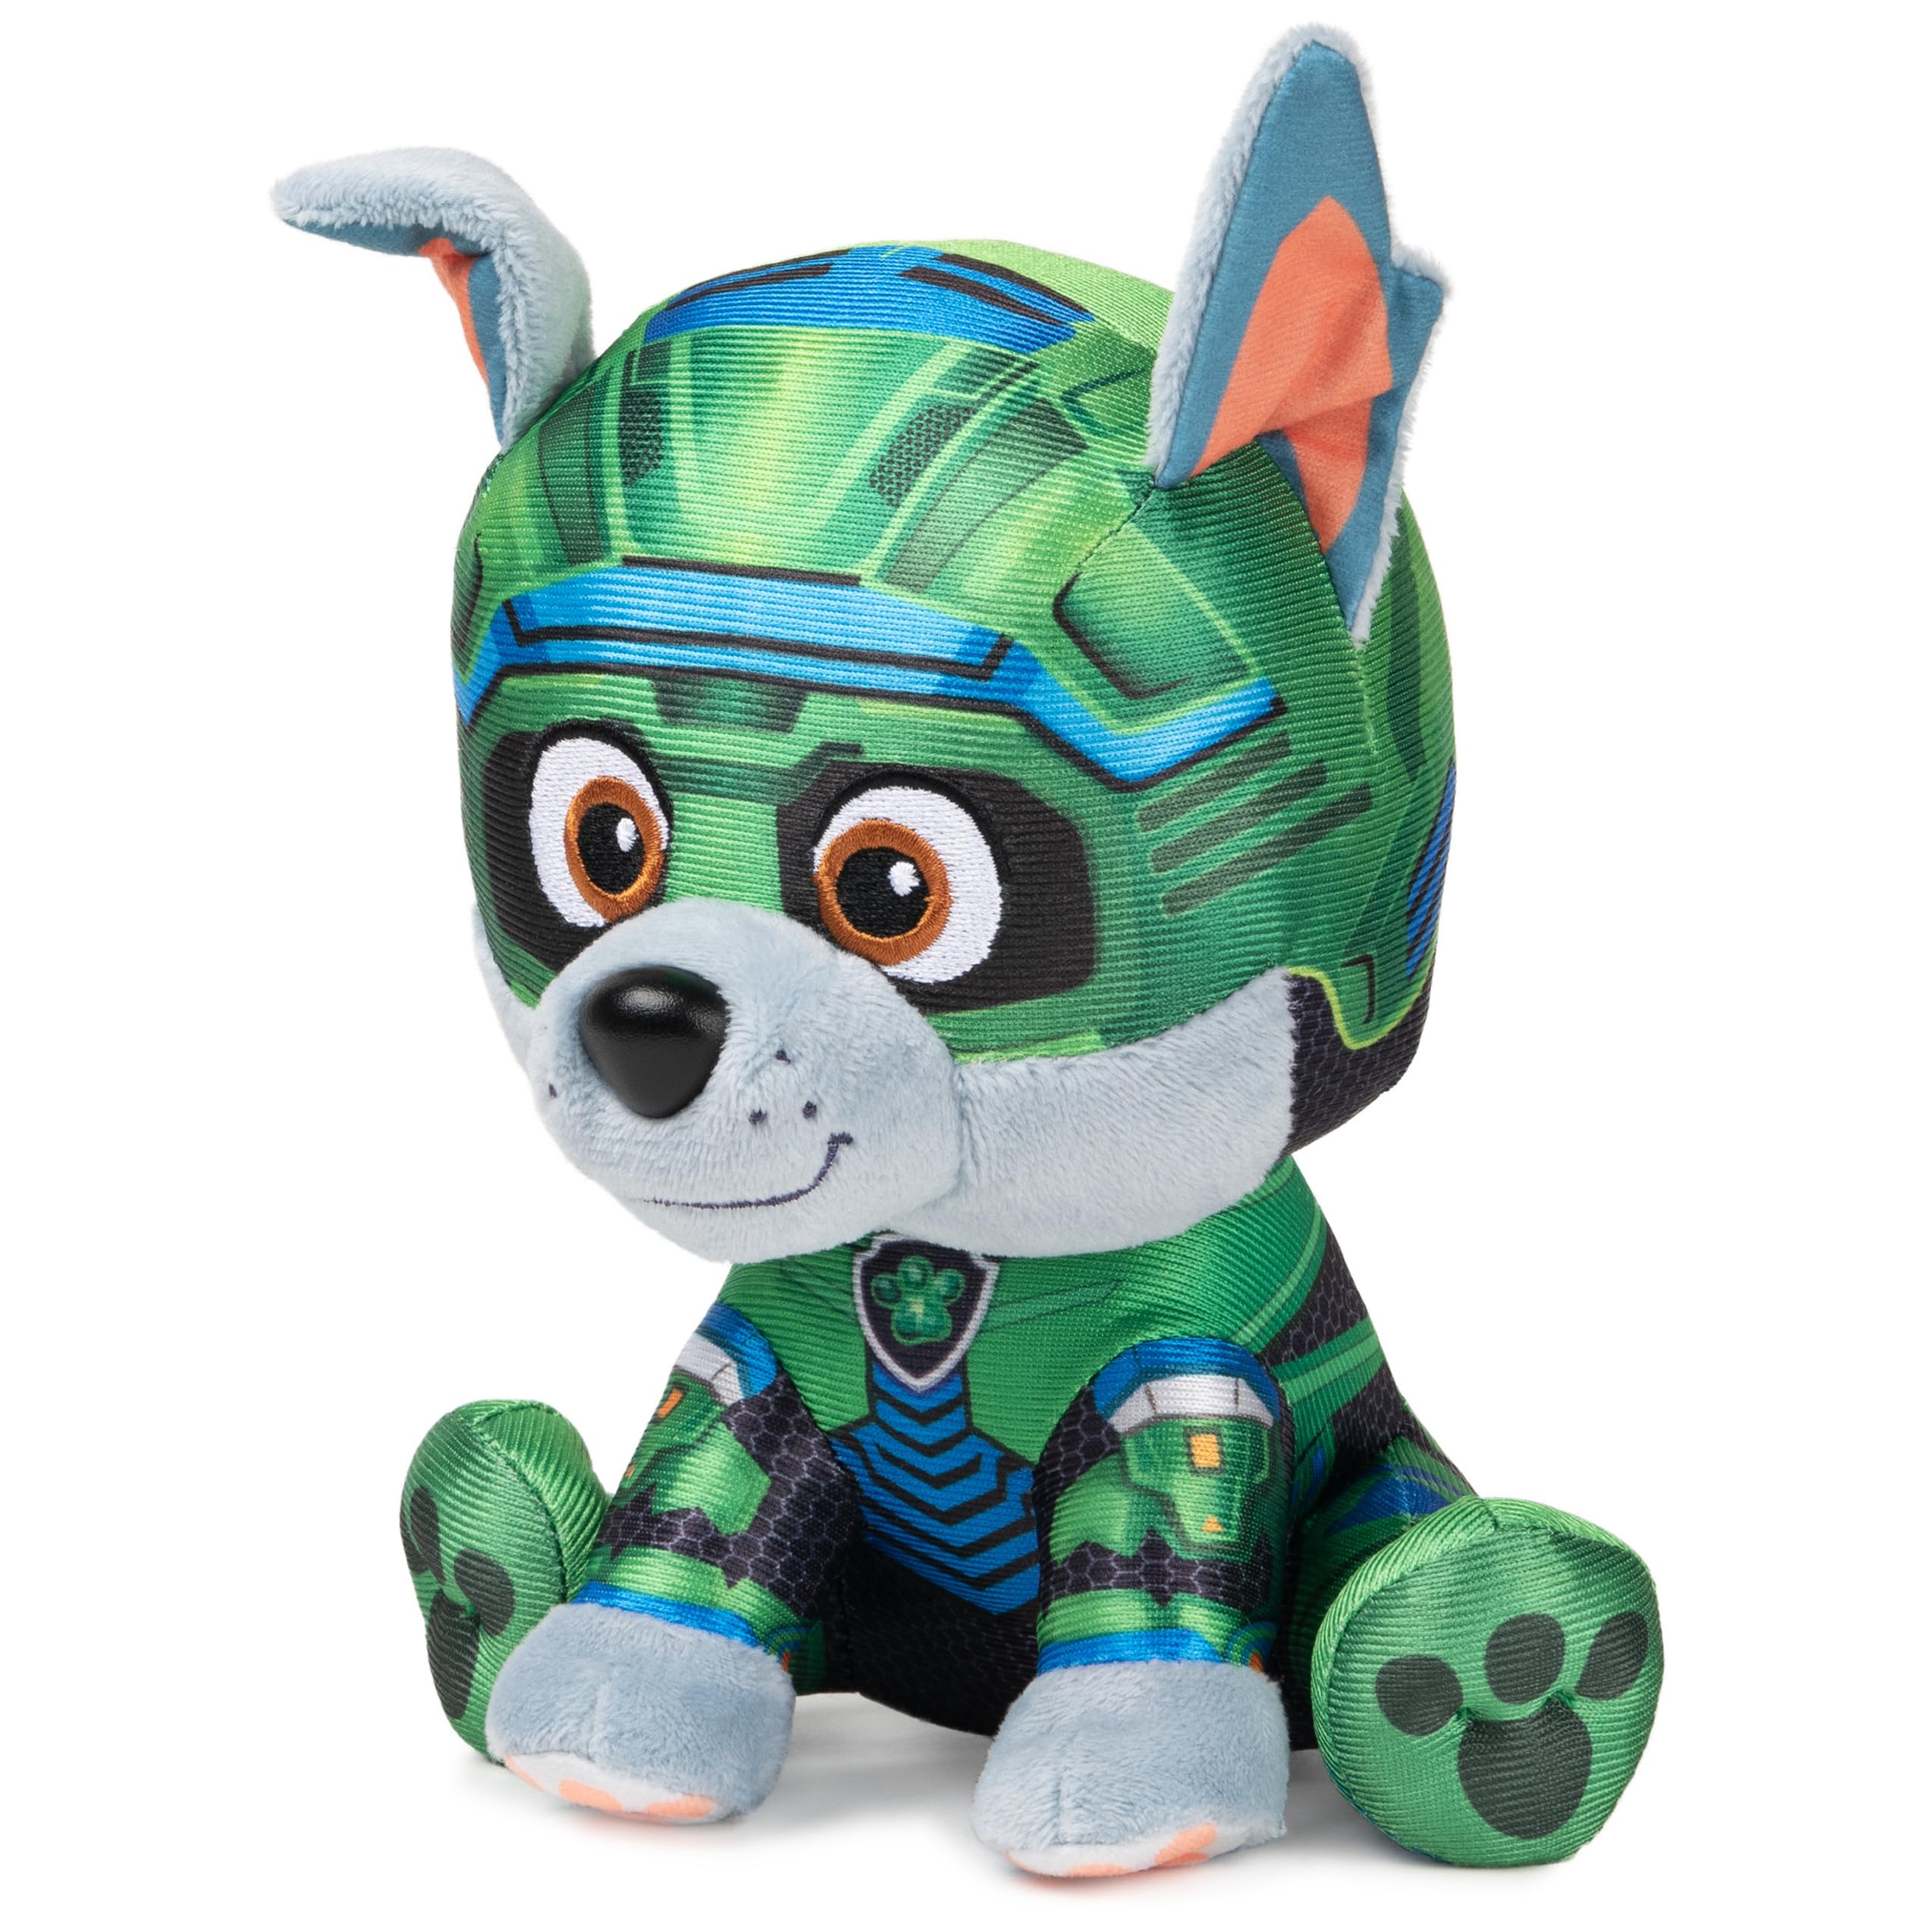 GUND PAW Patrol: The Mighty Movie Rocky Stuffed Animal, Officially Licensed Plush Toy for Ages 1 and Up, 6”